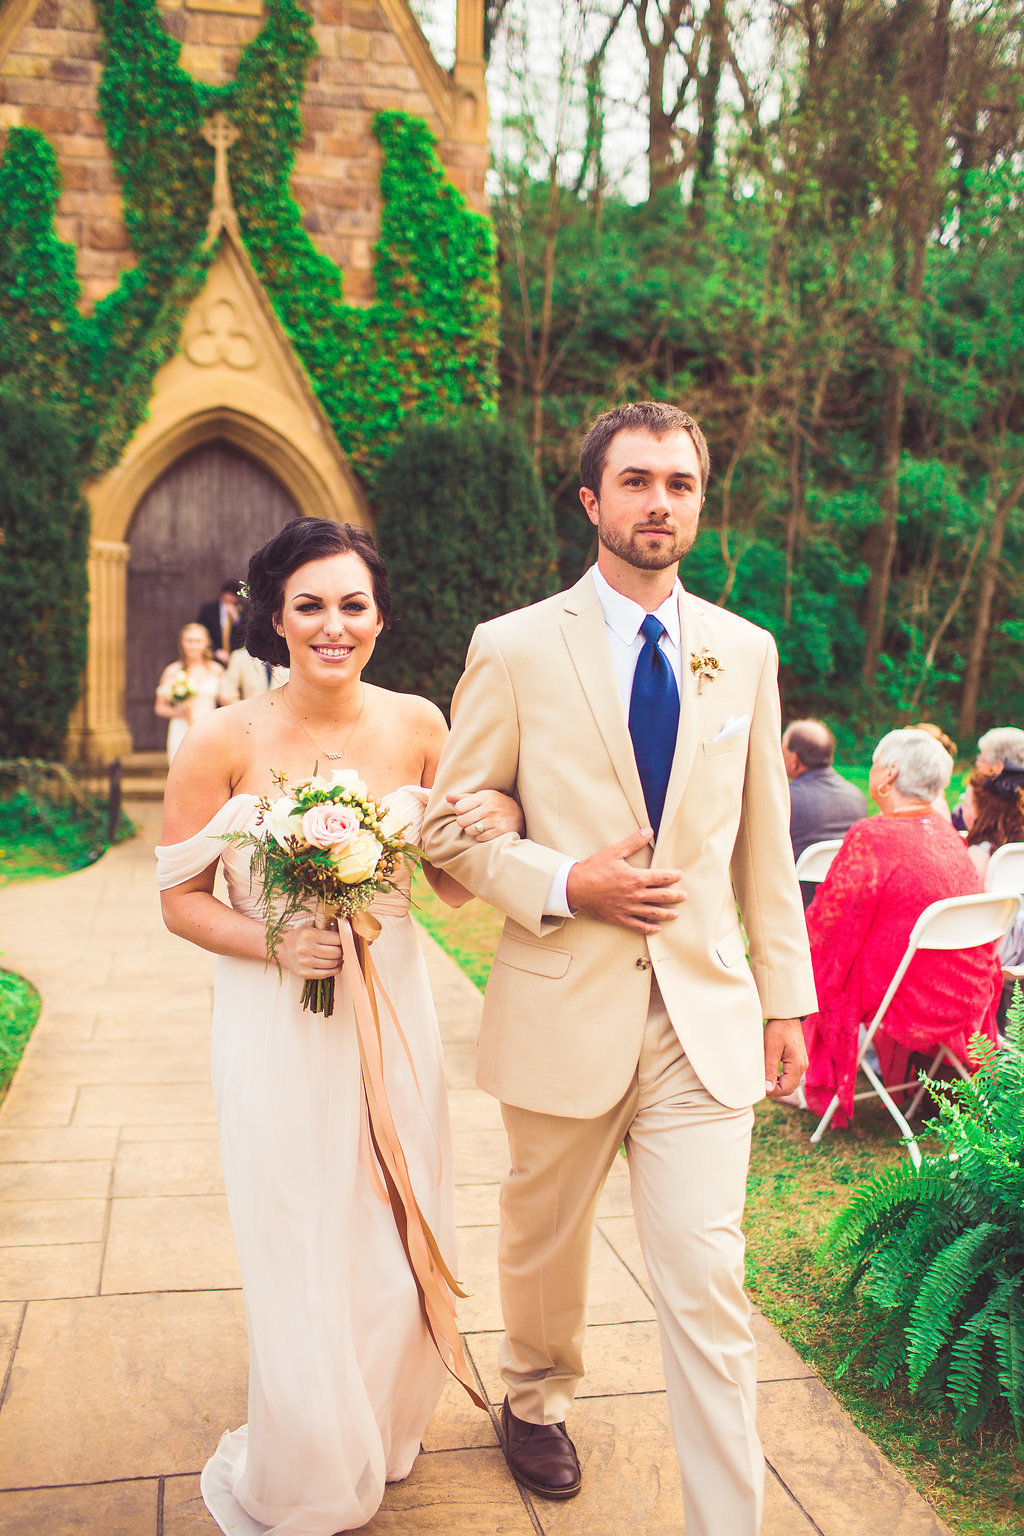 Wedding Photograph Of Bridesmaid Holding a Bouquet and Groomsman in Light Brown Suit Walking Down The Aisle Los Angeles